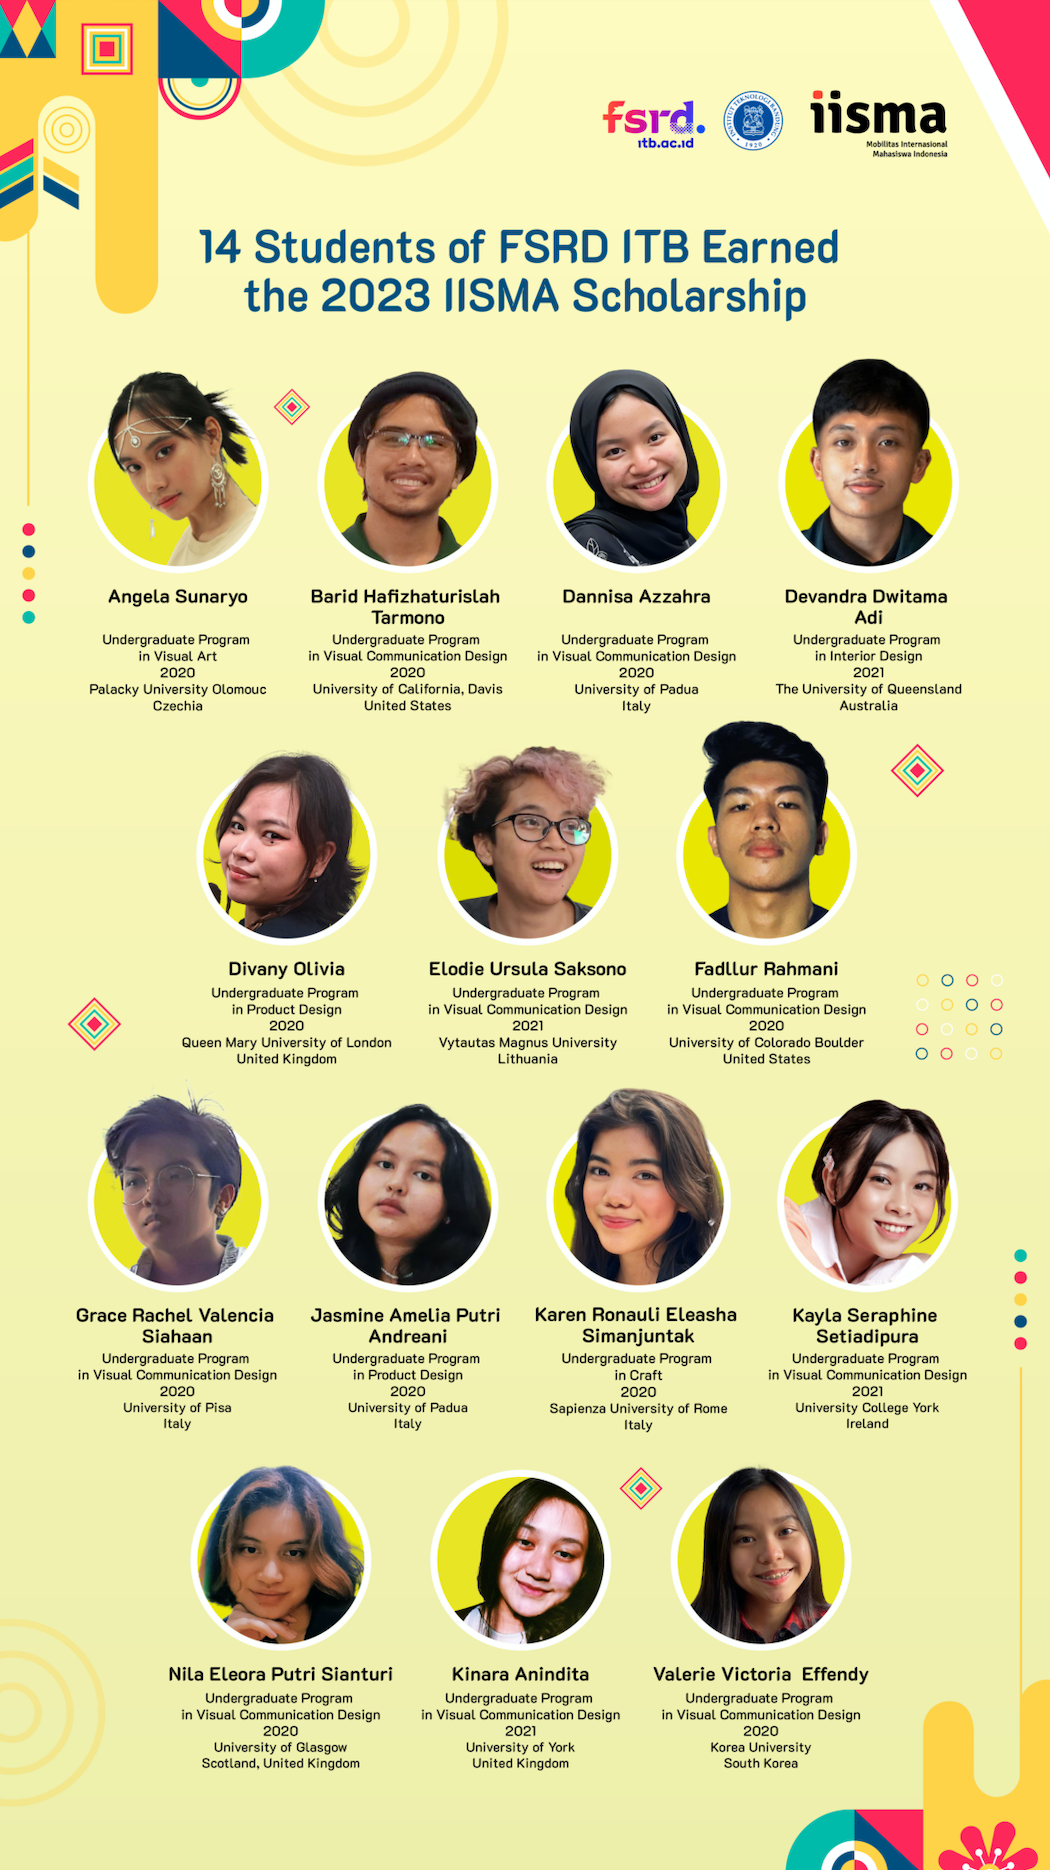 A Proud Achievement for FSRD ITB Students who Earned the 2023 IISMA Scholarship